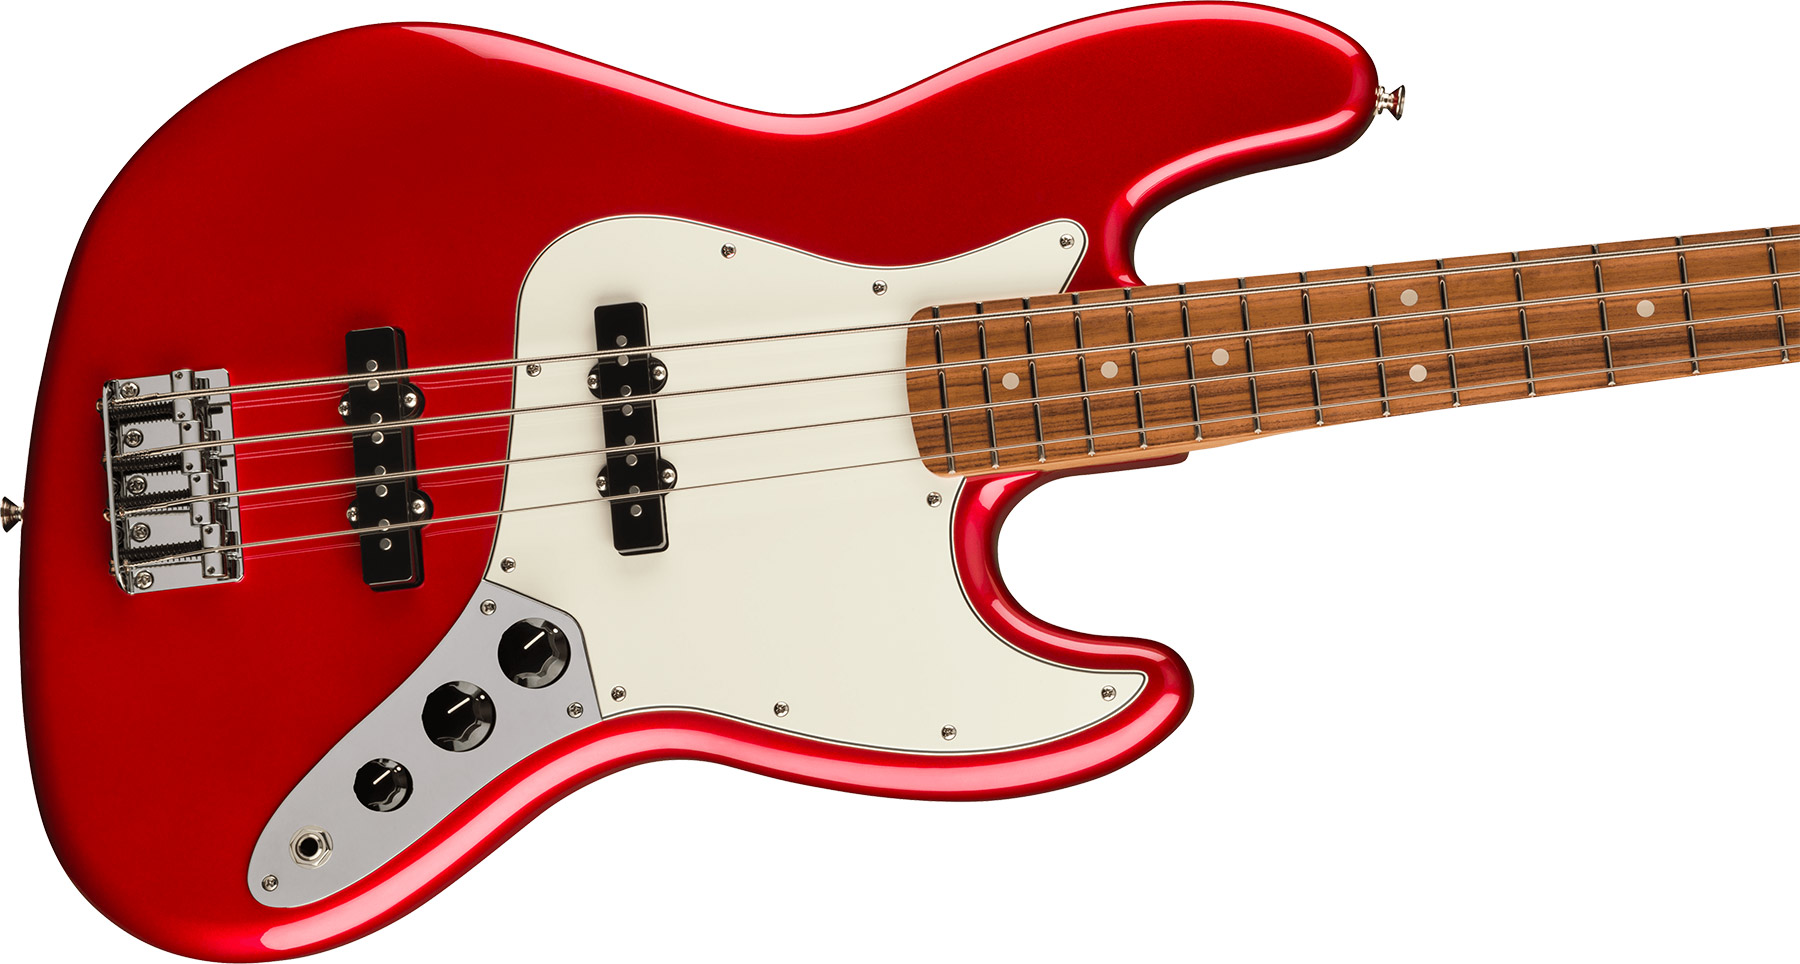 Fender Jazz Bass Player Mex 2023 Pf - Candy Apple Red - Solid body electric bass - Variation 2